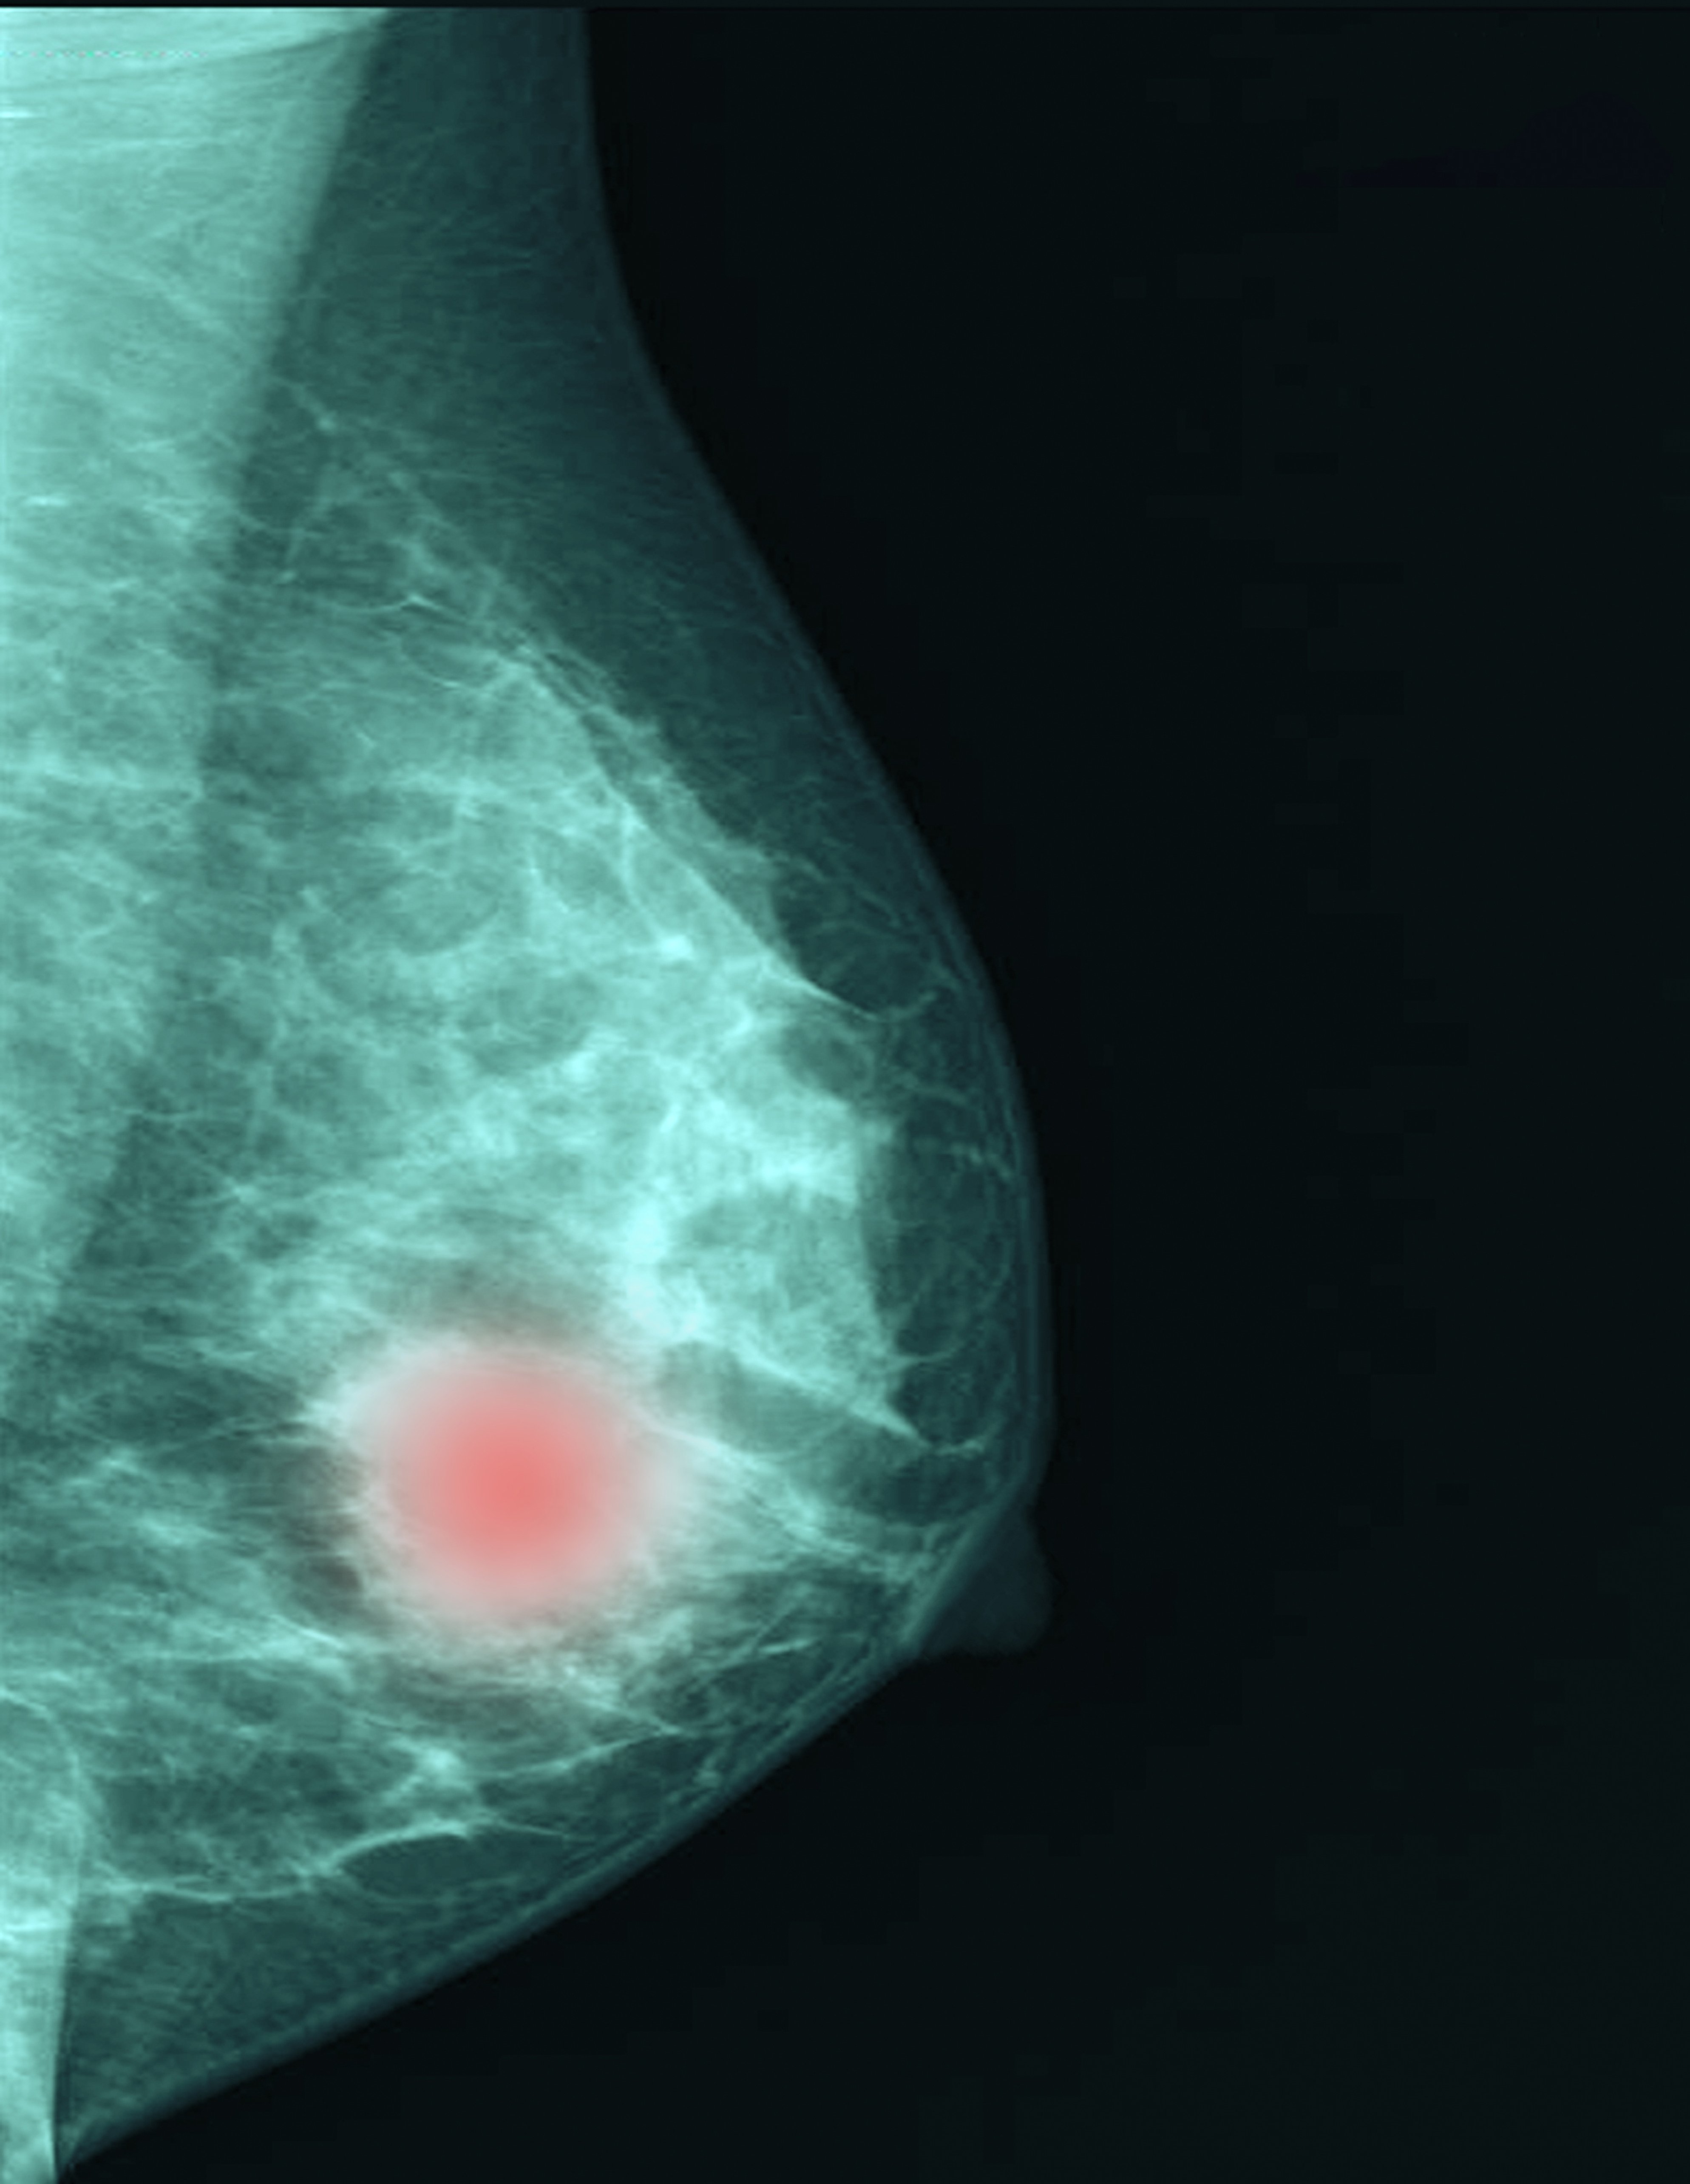 AI has the potential to help radiologists improve the efficiency and effectiveness of breast cancer imaging